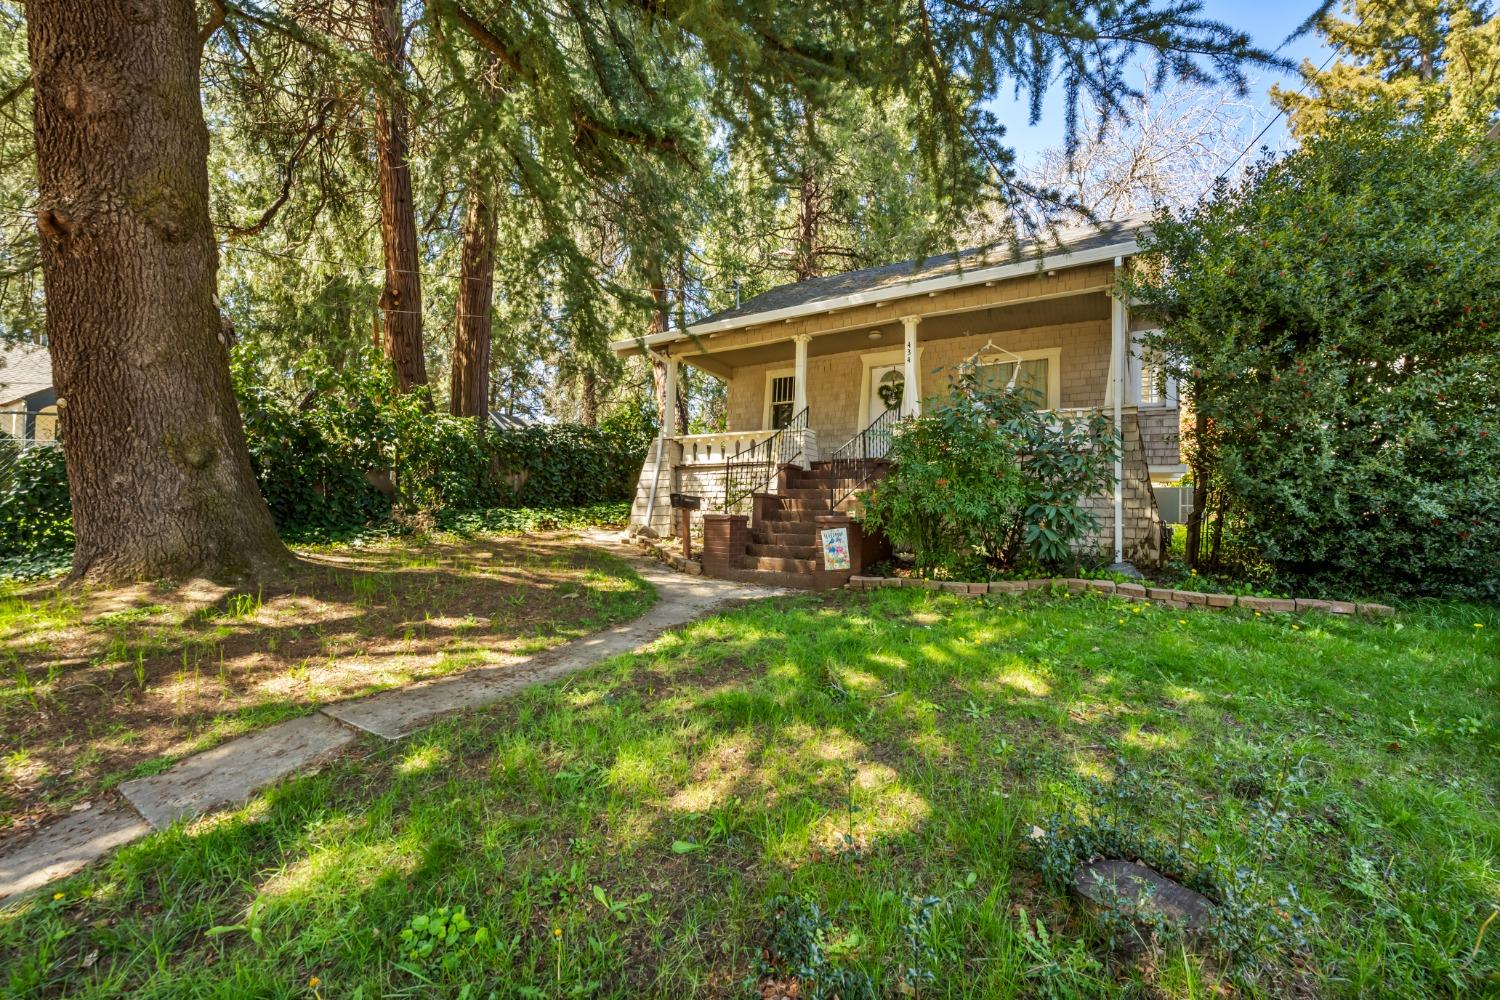 Photo of 434 S Auburn St in Grass Valley, CA